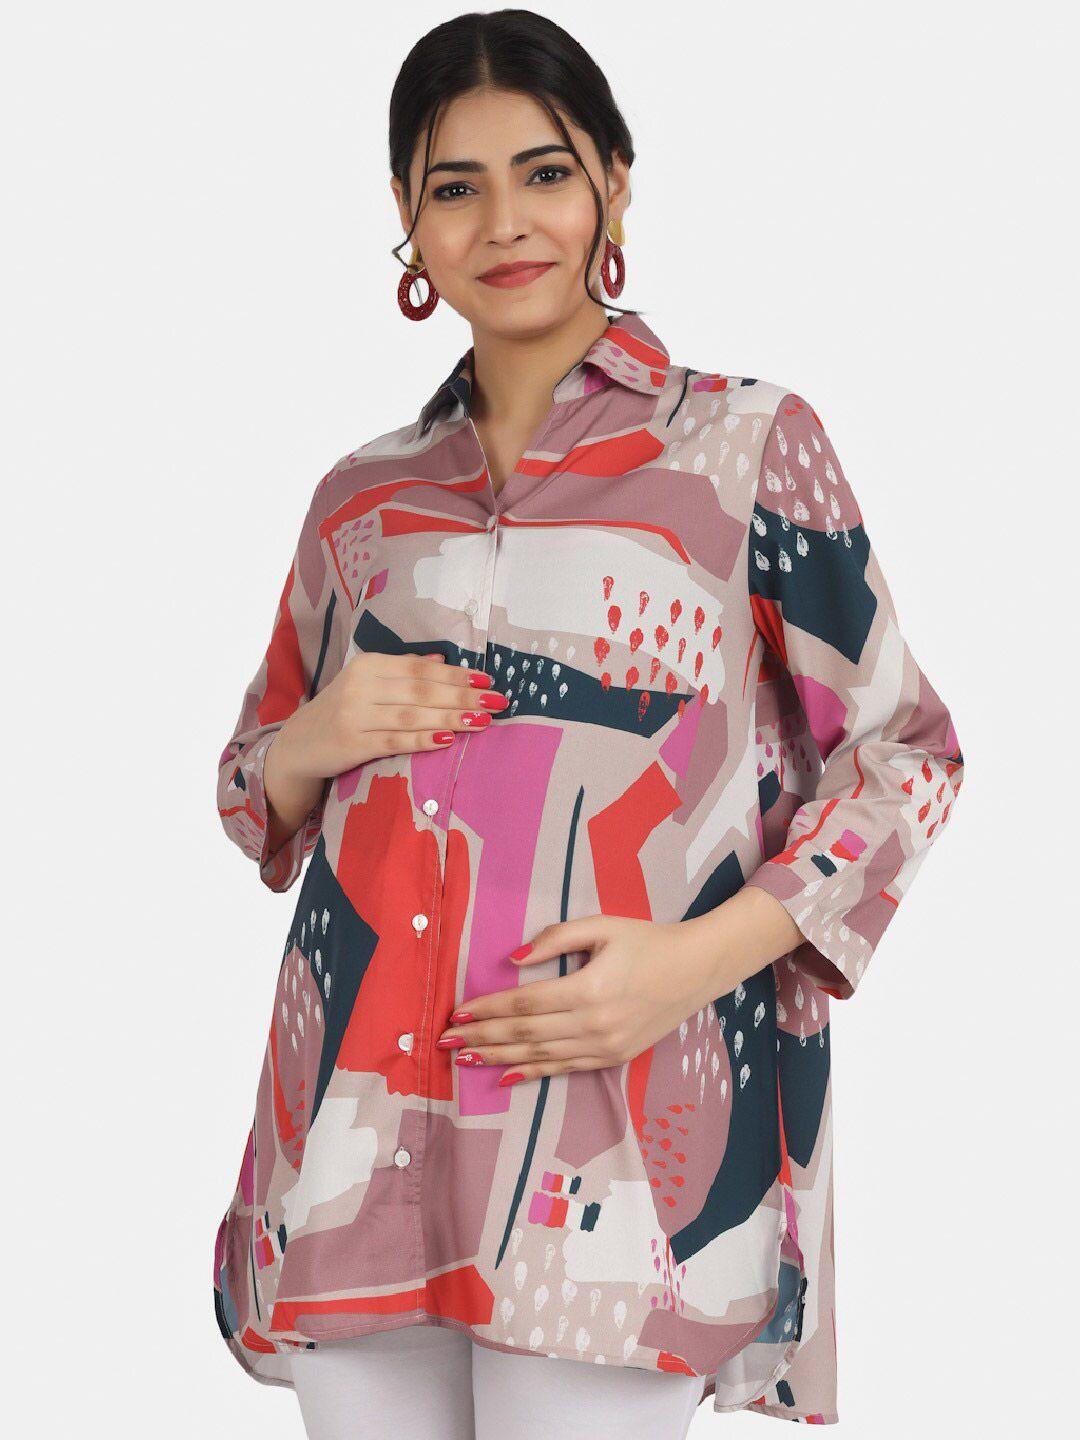 angloindu abstract printed three-quarter sleeves shirt style maternity top